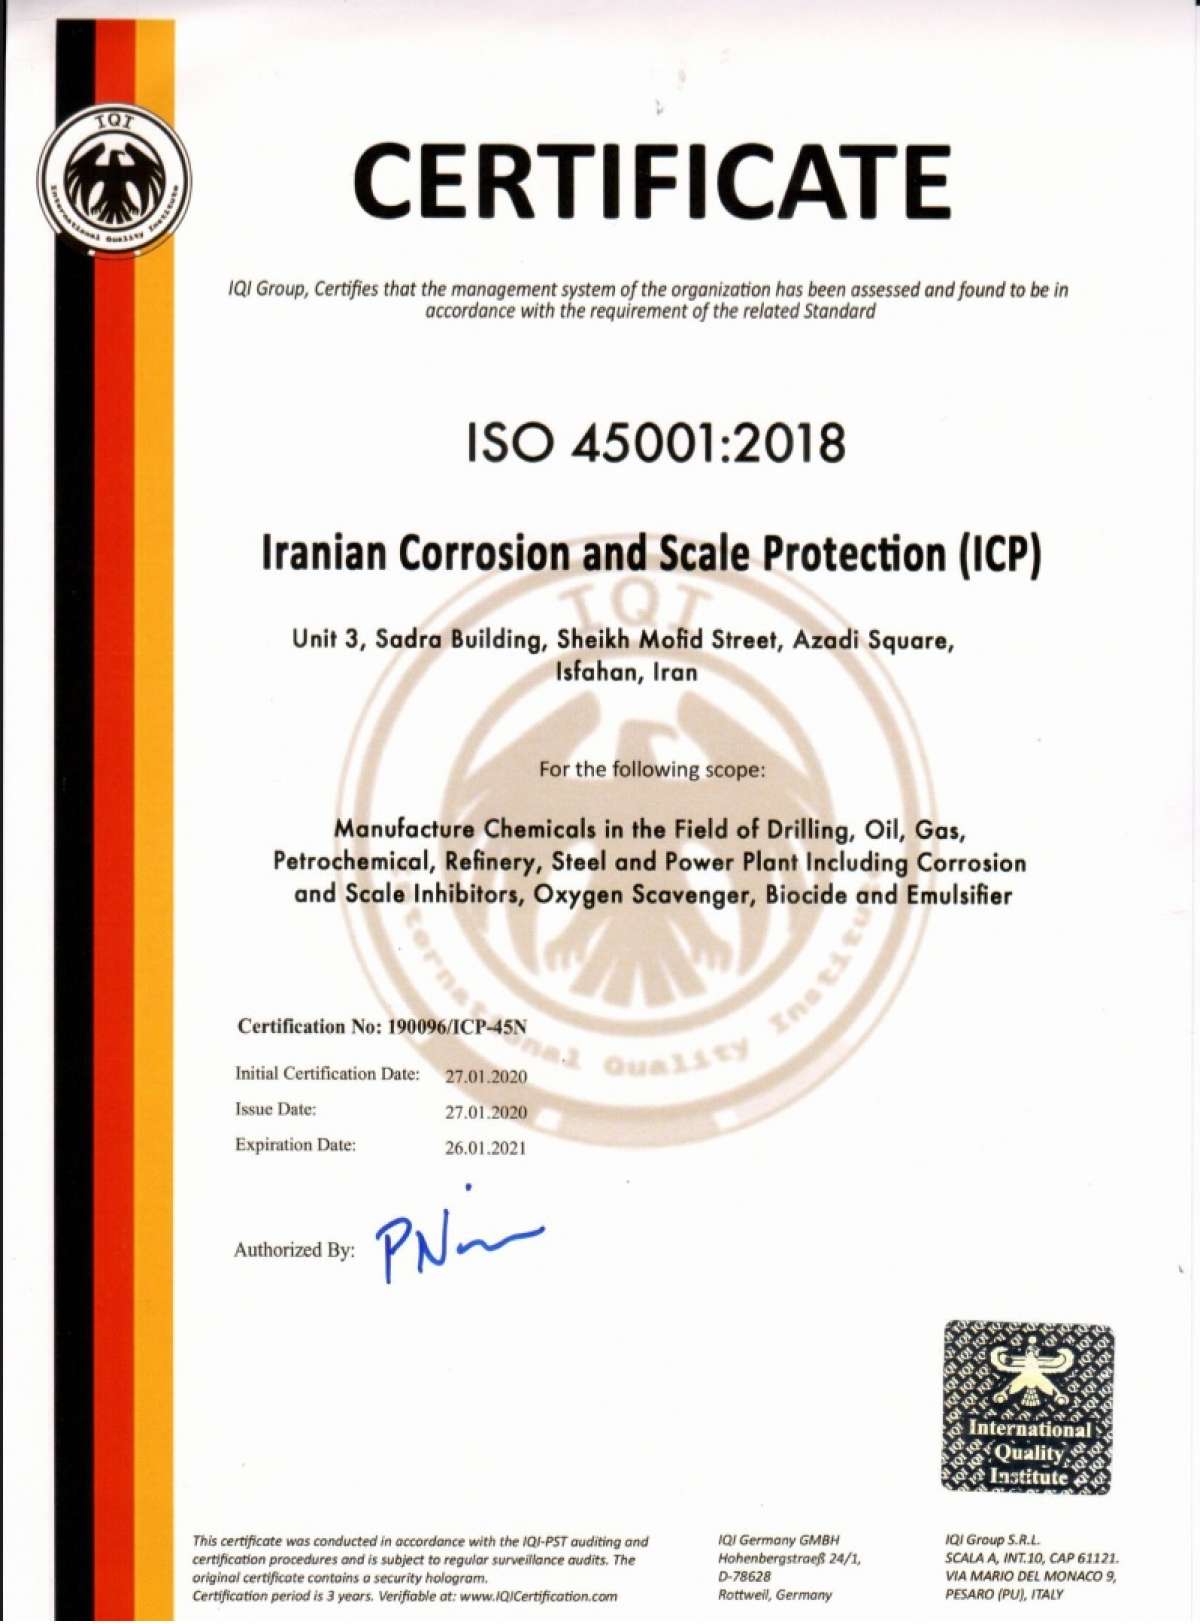 ISO45001-2018